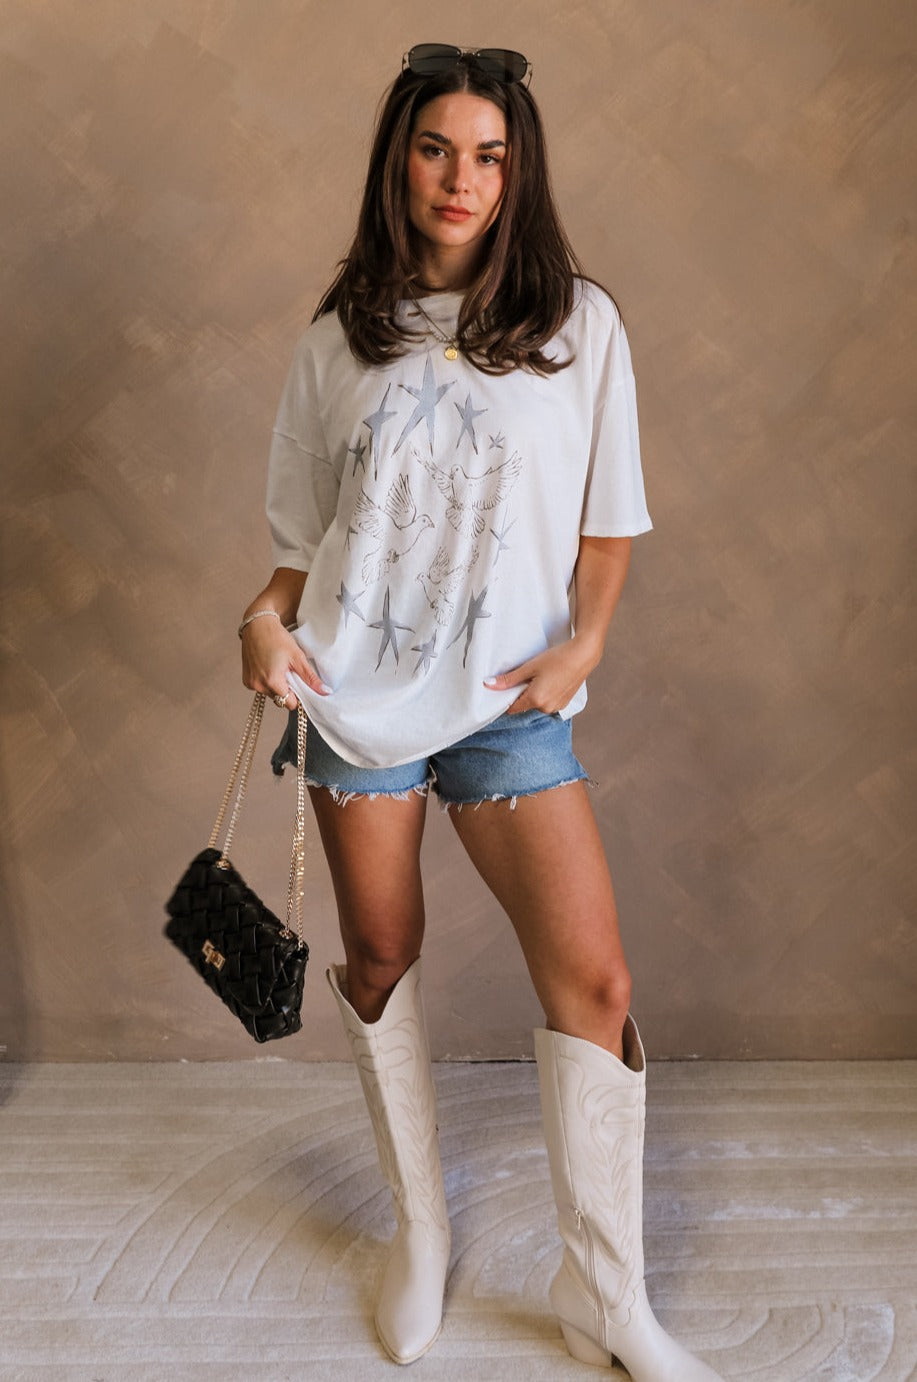 Full body view of female model wearing the Stars and Birds White Distressed Graphic Top which features  White Cotton Fabric, Distressed Details, Short Sleeves, Round Neckline and Stars and Birds Graphic